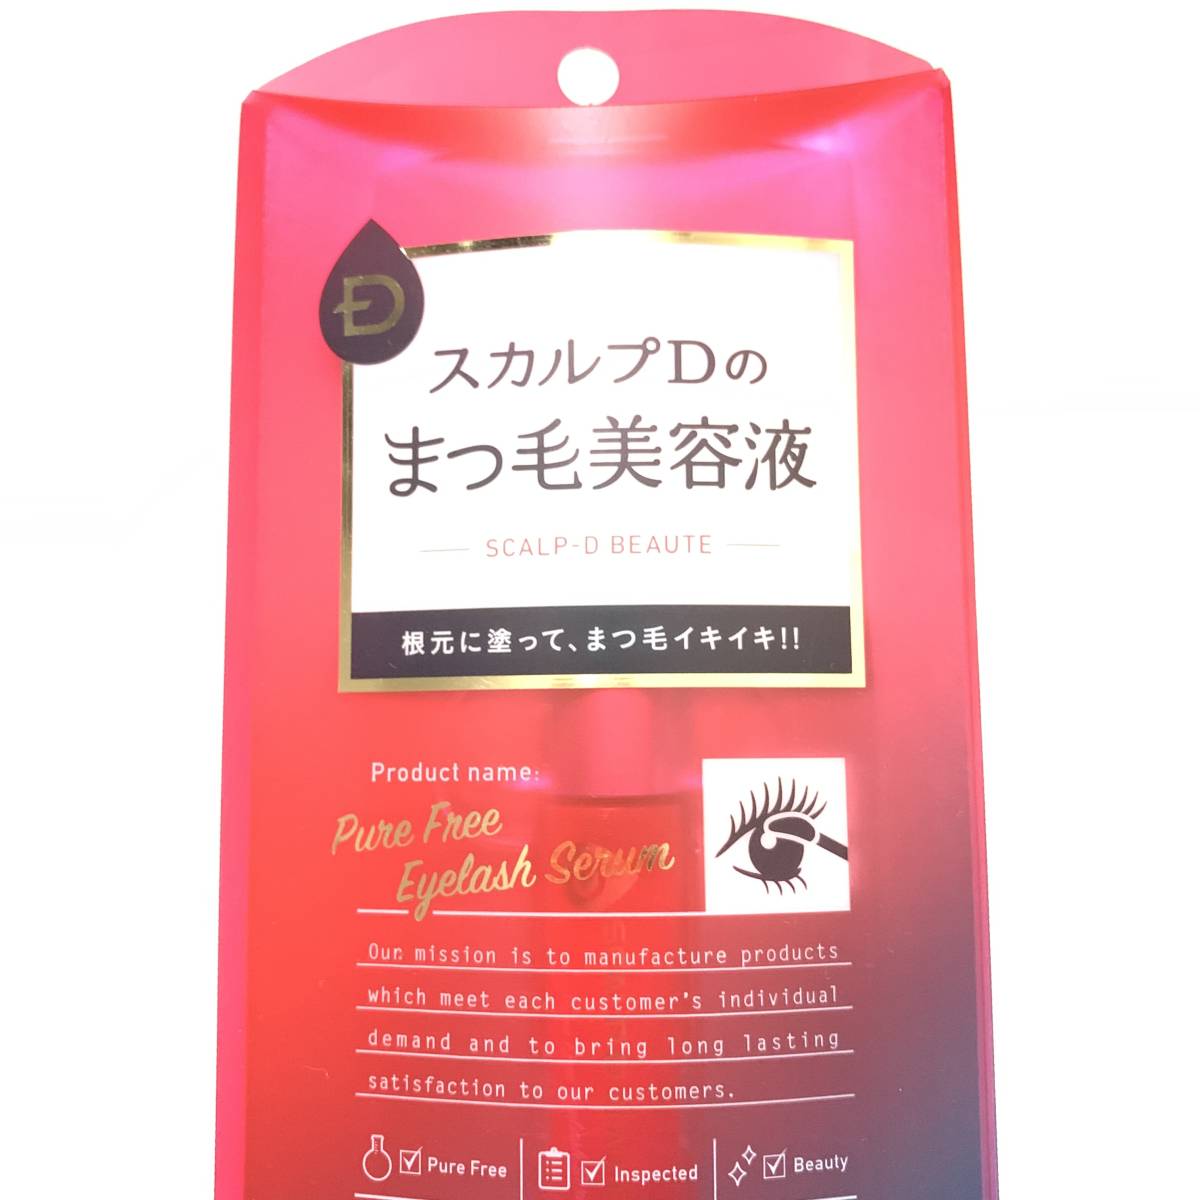  new goods prompt decision * scalp D Beaute pure free eyelashes Sera m( eyelashes beauty care liquid )* several buy possibility 